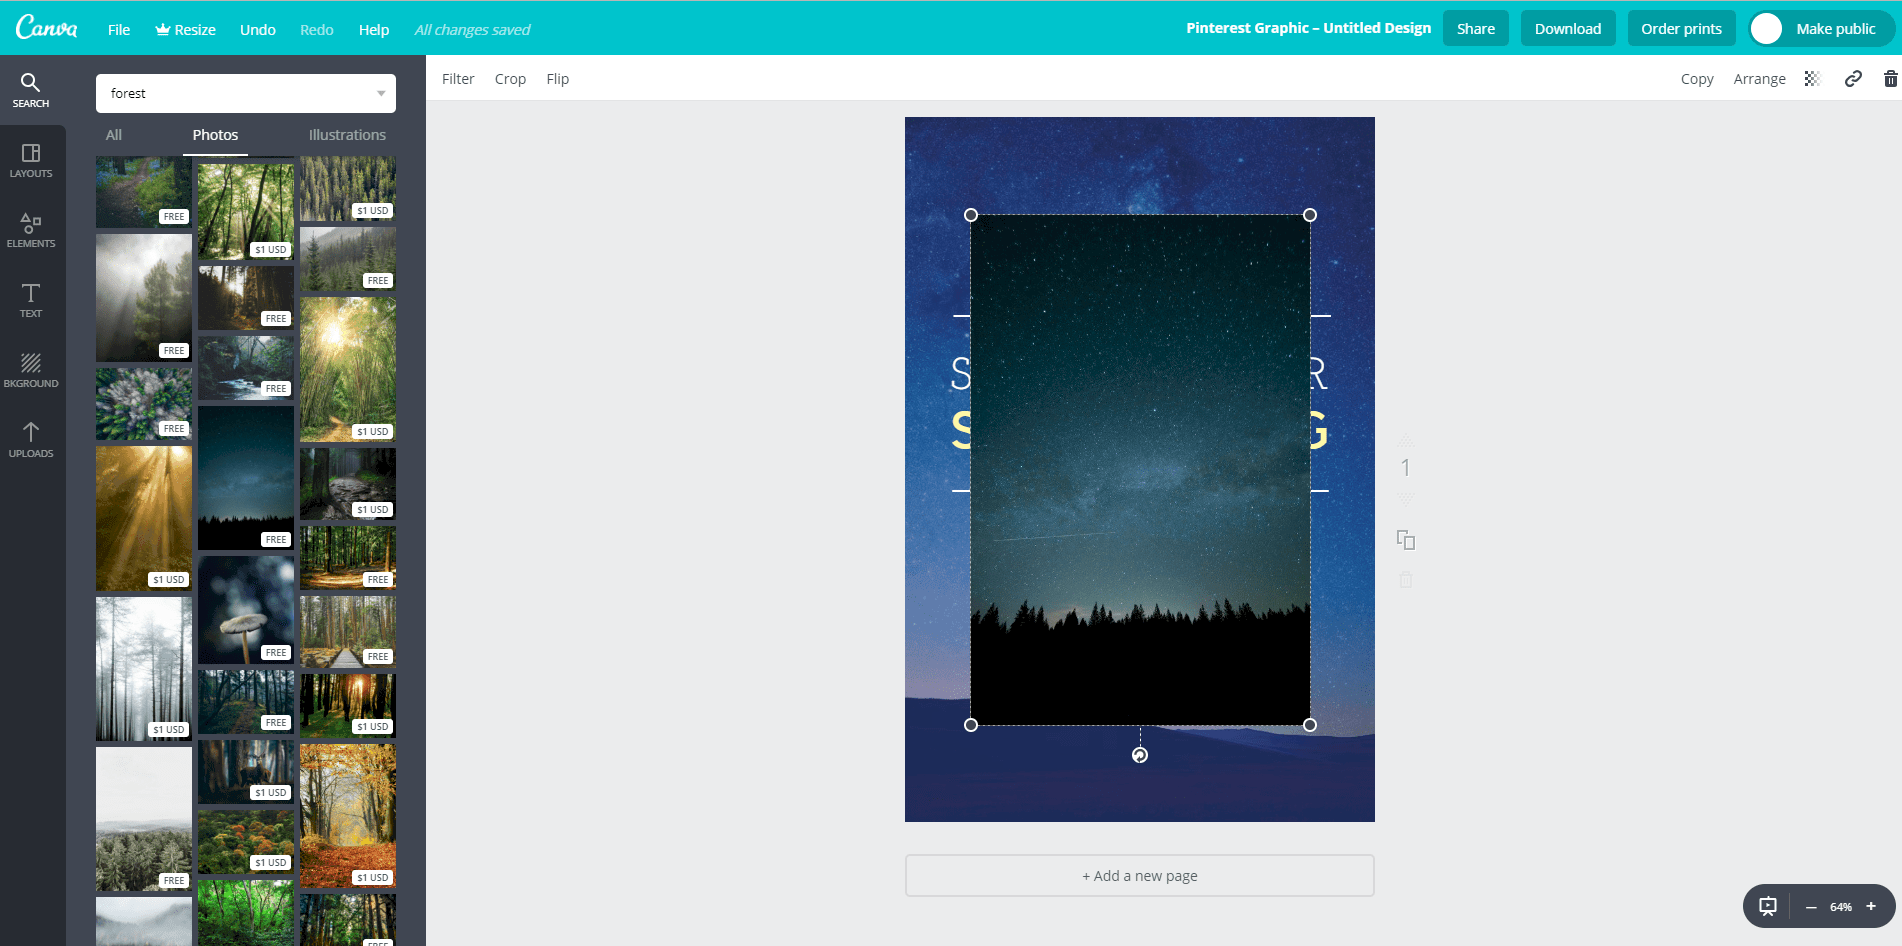 How to Create Amazing Pins for Free using Canva